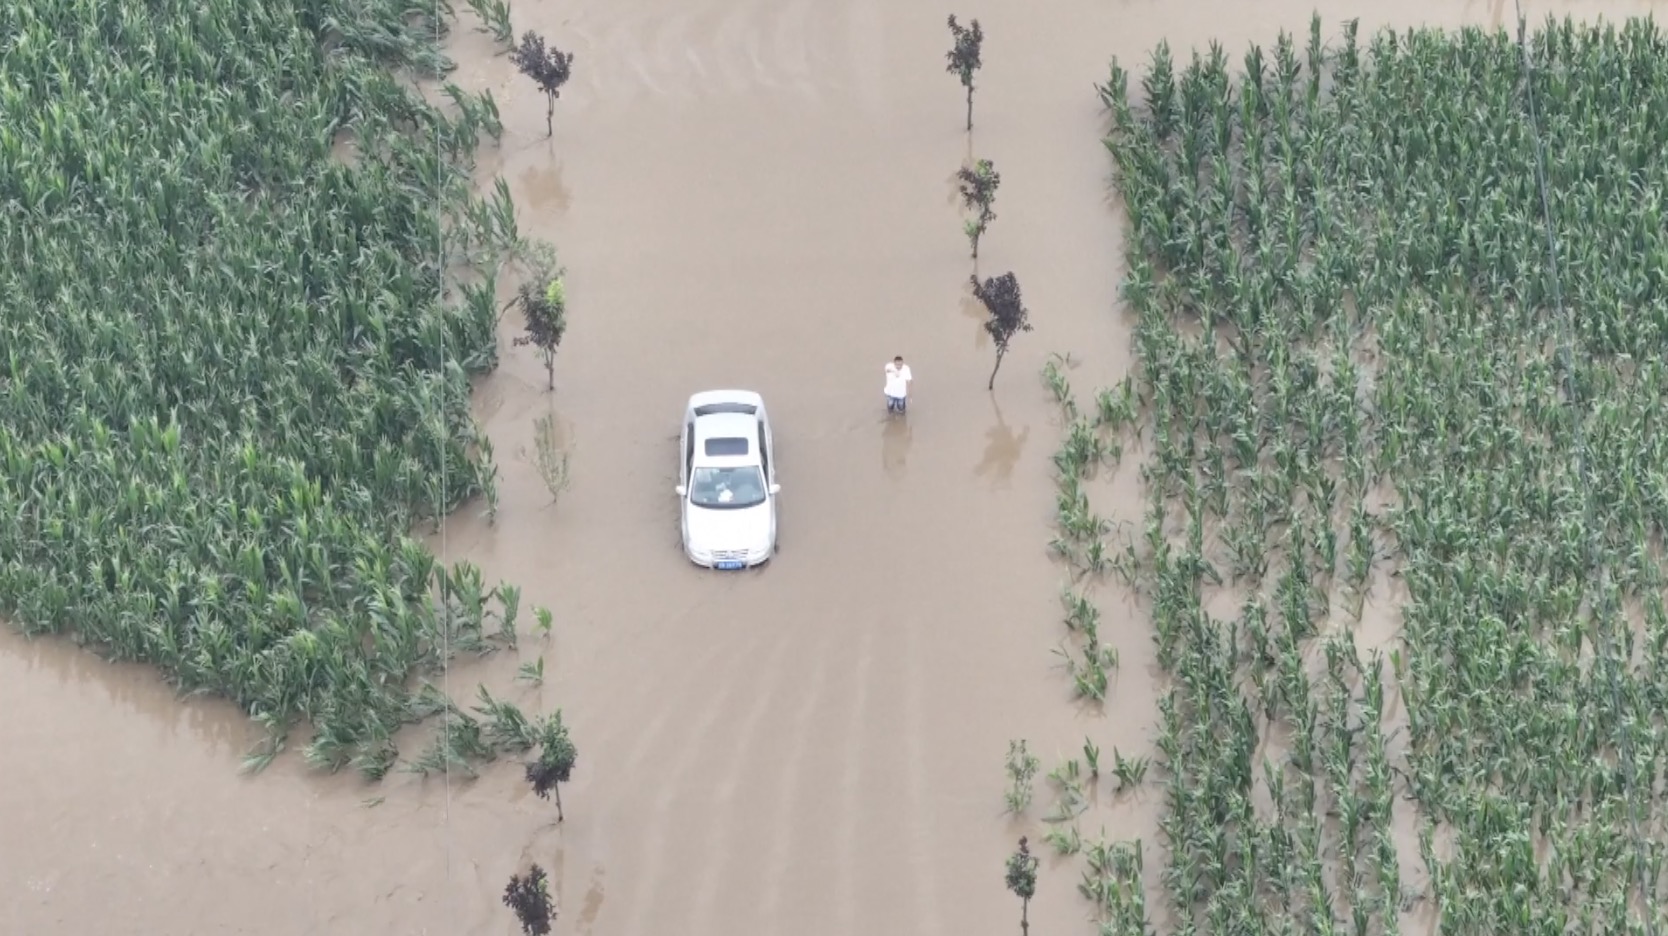 A vehicle wading through floodwater. /CGTN